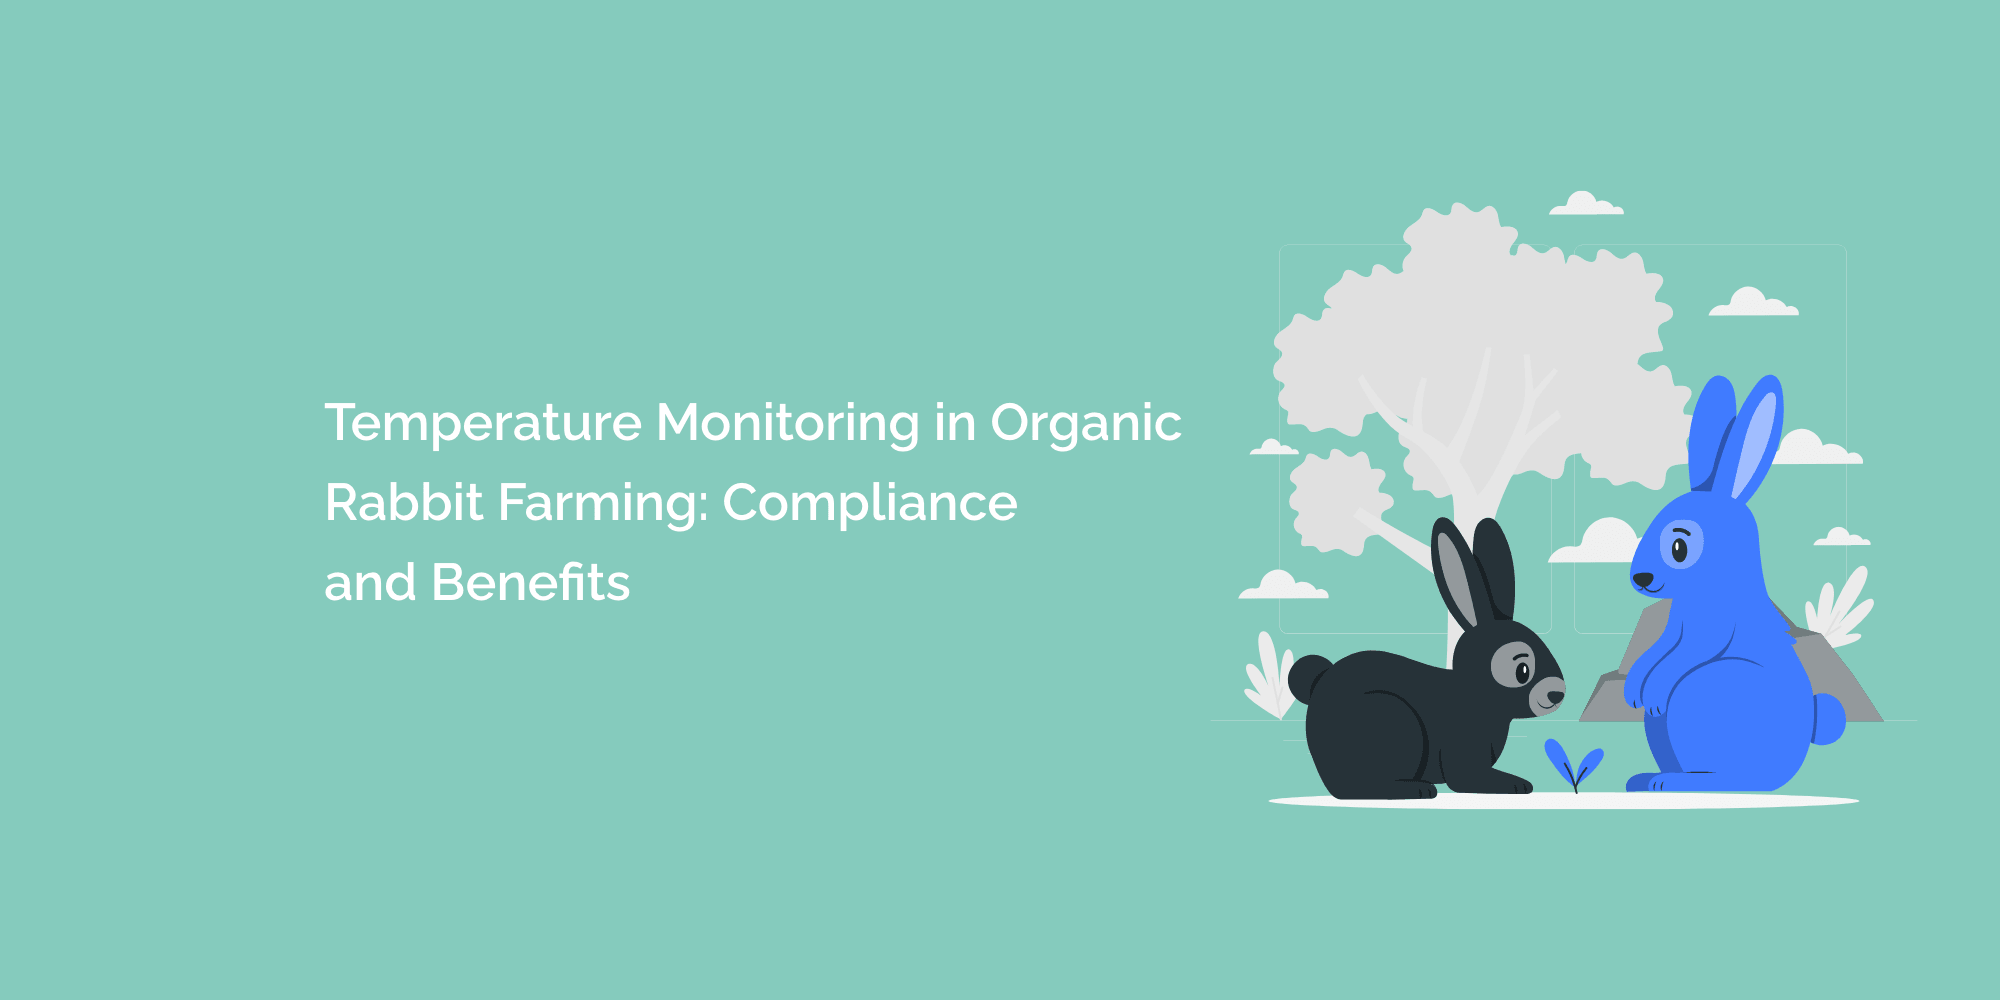 Temperature Monitoring in Organic Rabbit Farming: Compliance and Benefits